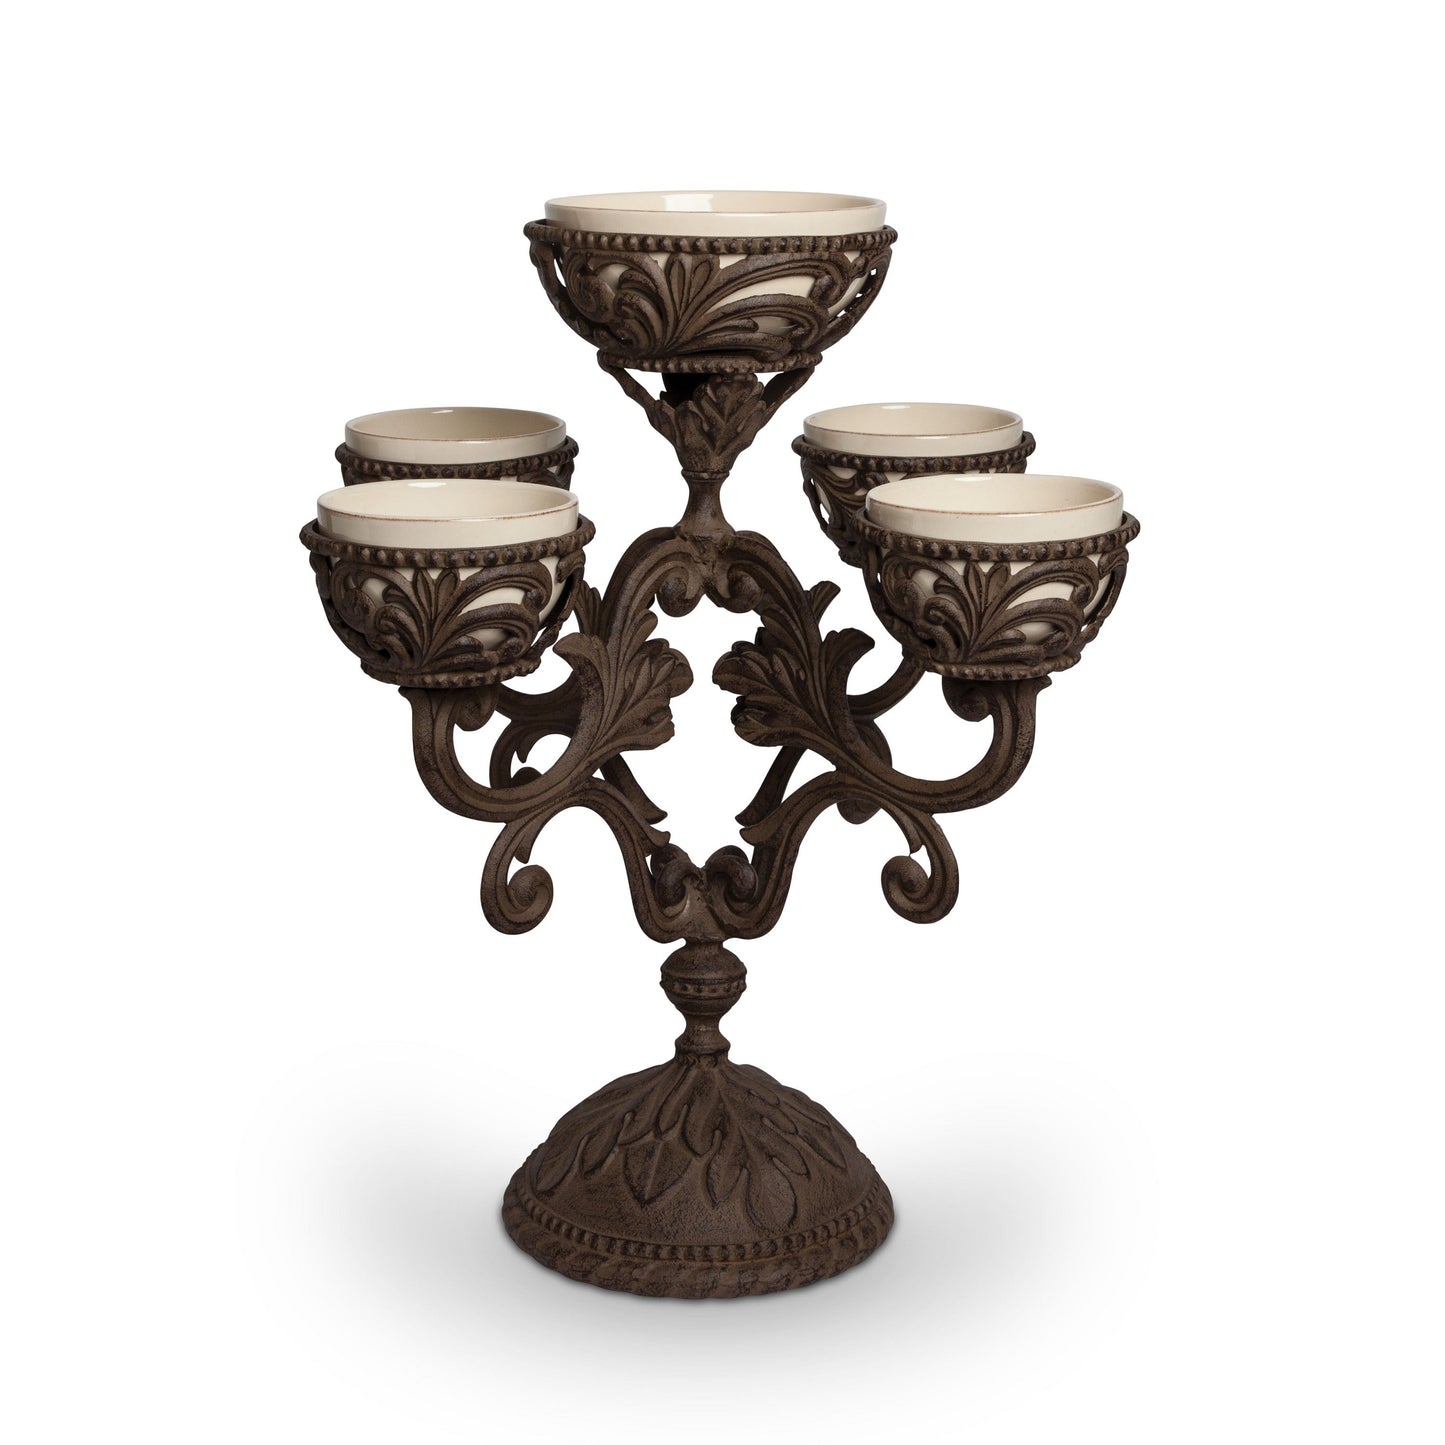 Gerson Companies 22.5-inch Acanthus Epergne, Metal with 5 Ceramic Bowls